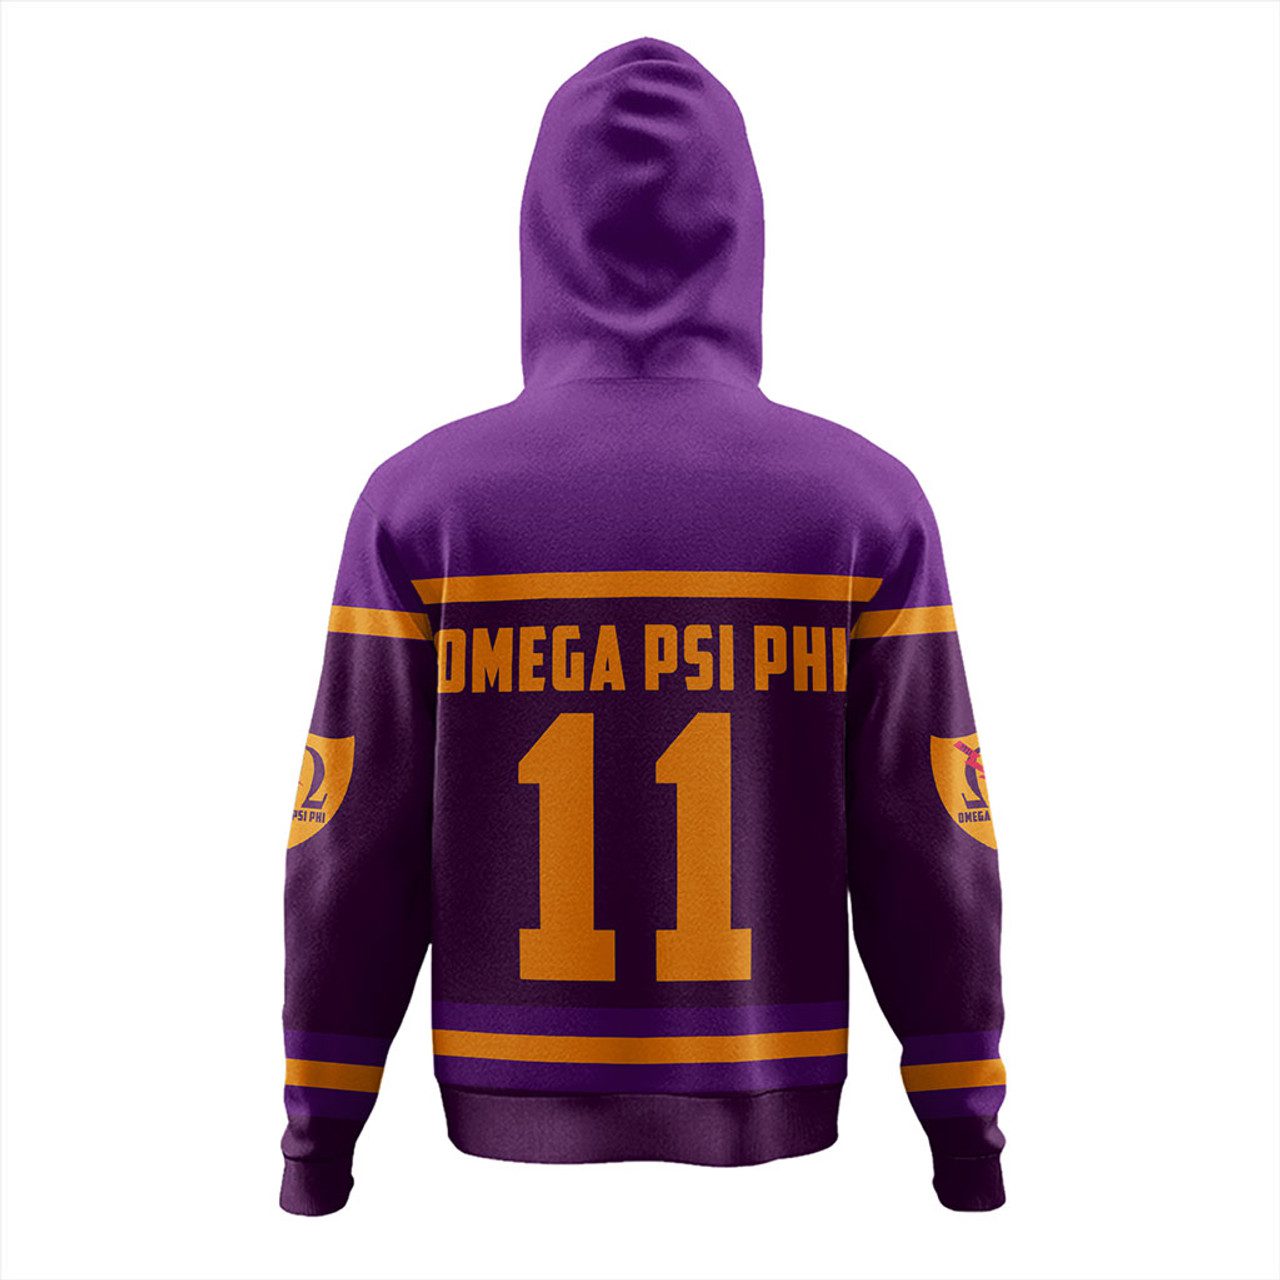 Omega Psi Phi Hoodie Crest Style